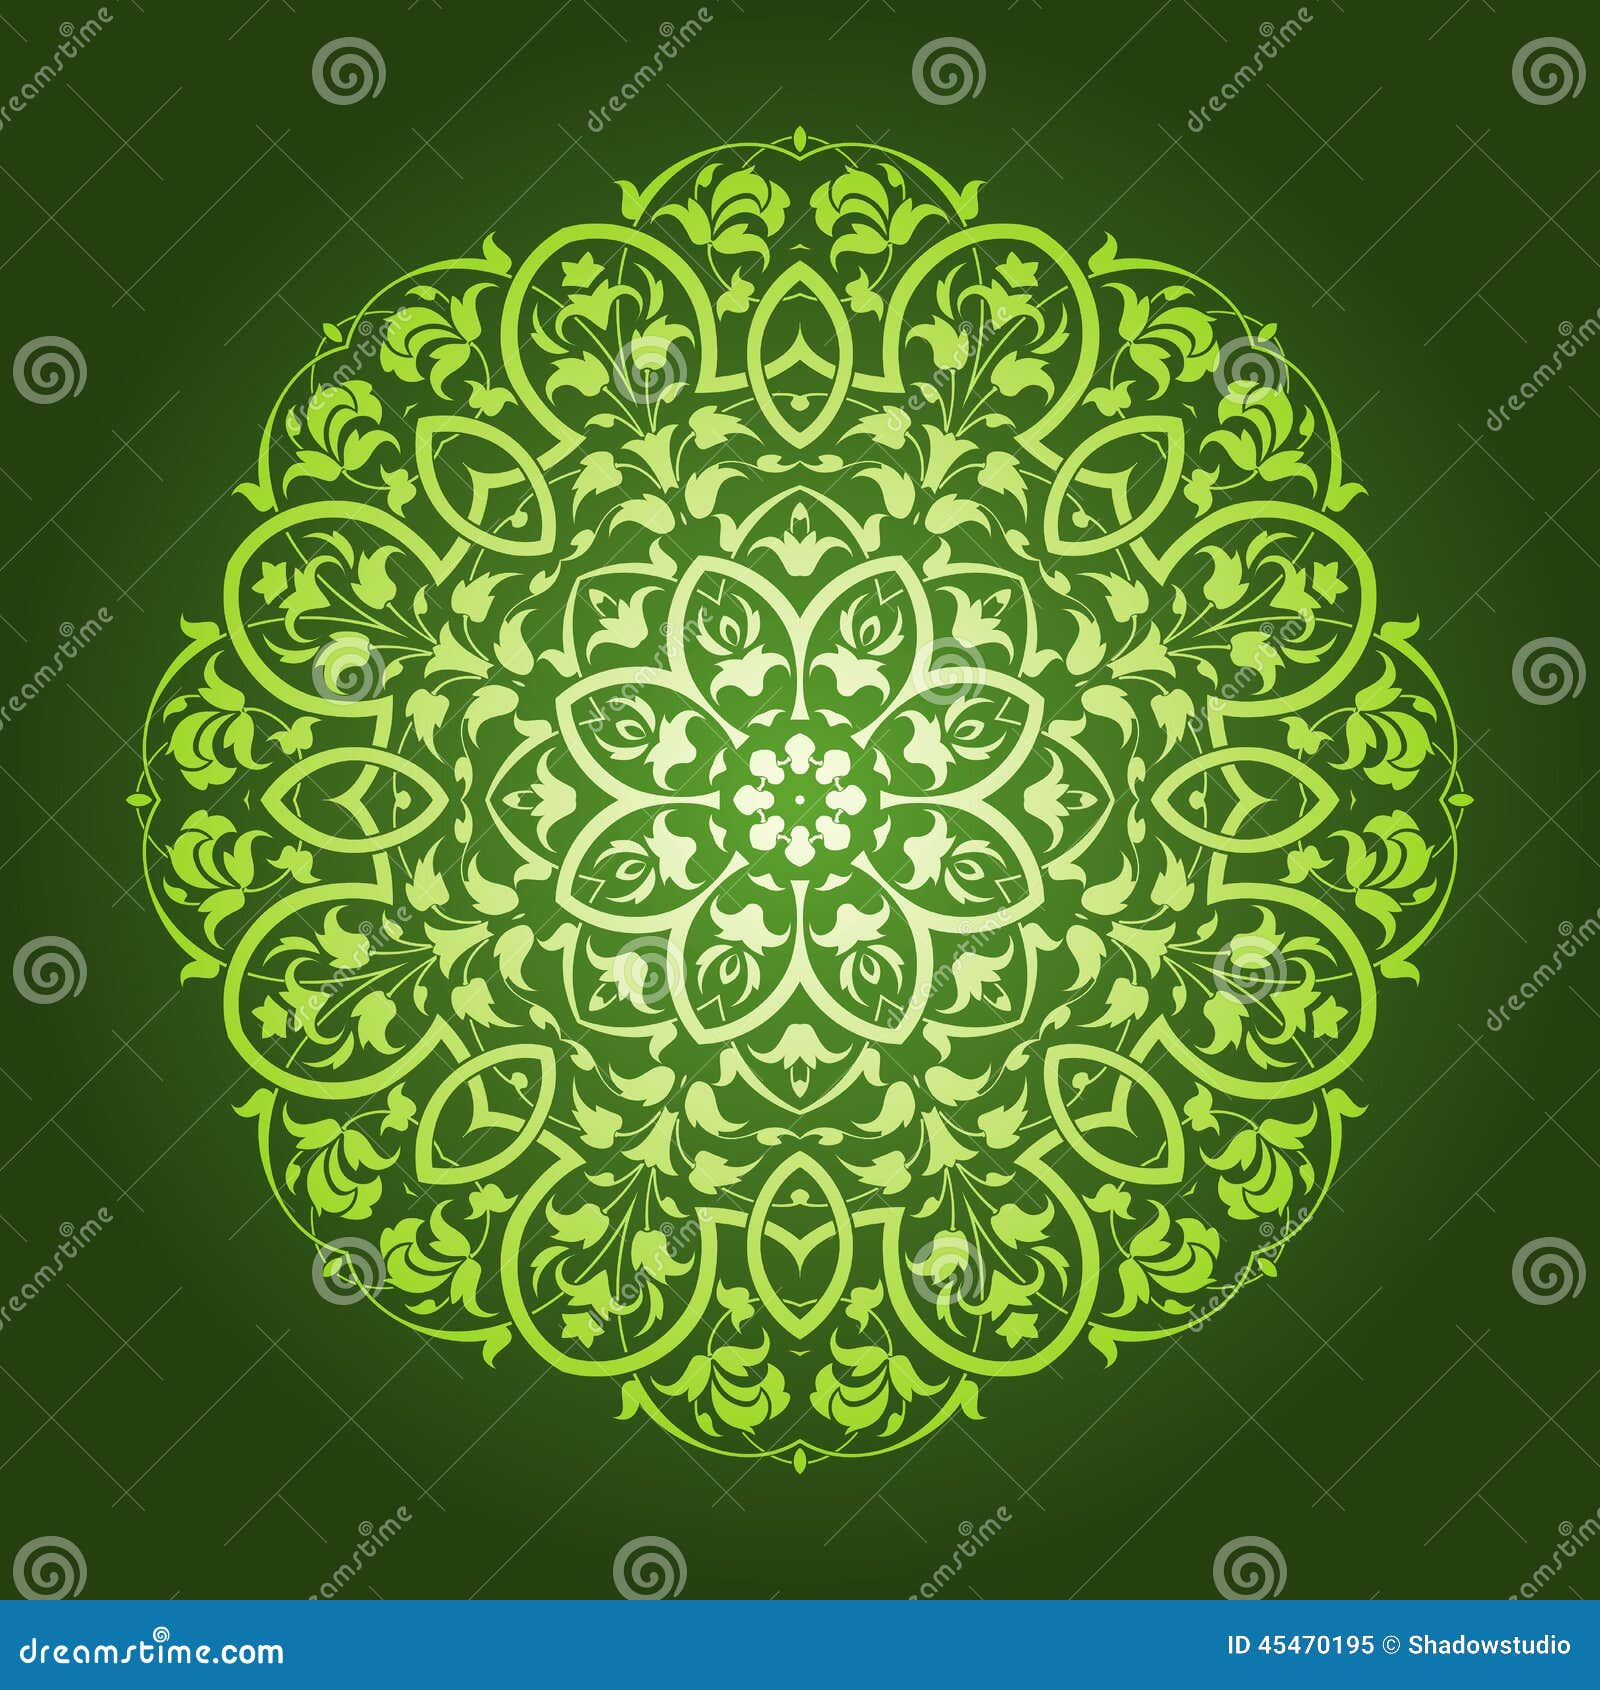 Abstract Floral Circular Pattern Design Stock Photo 